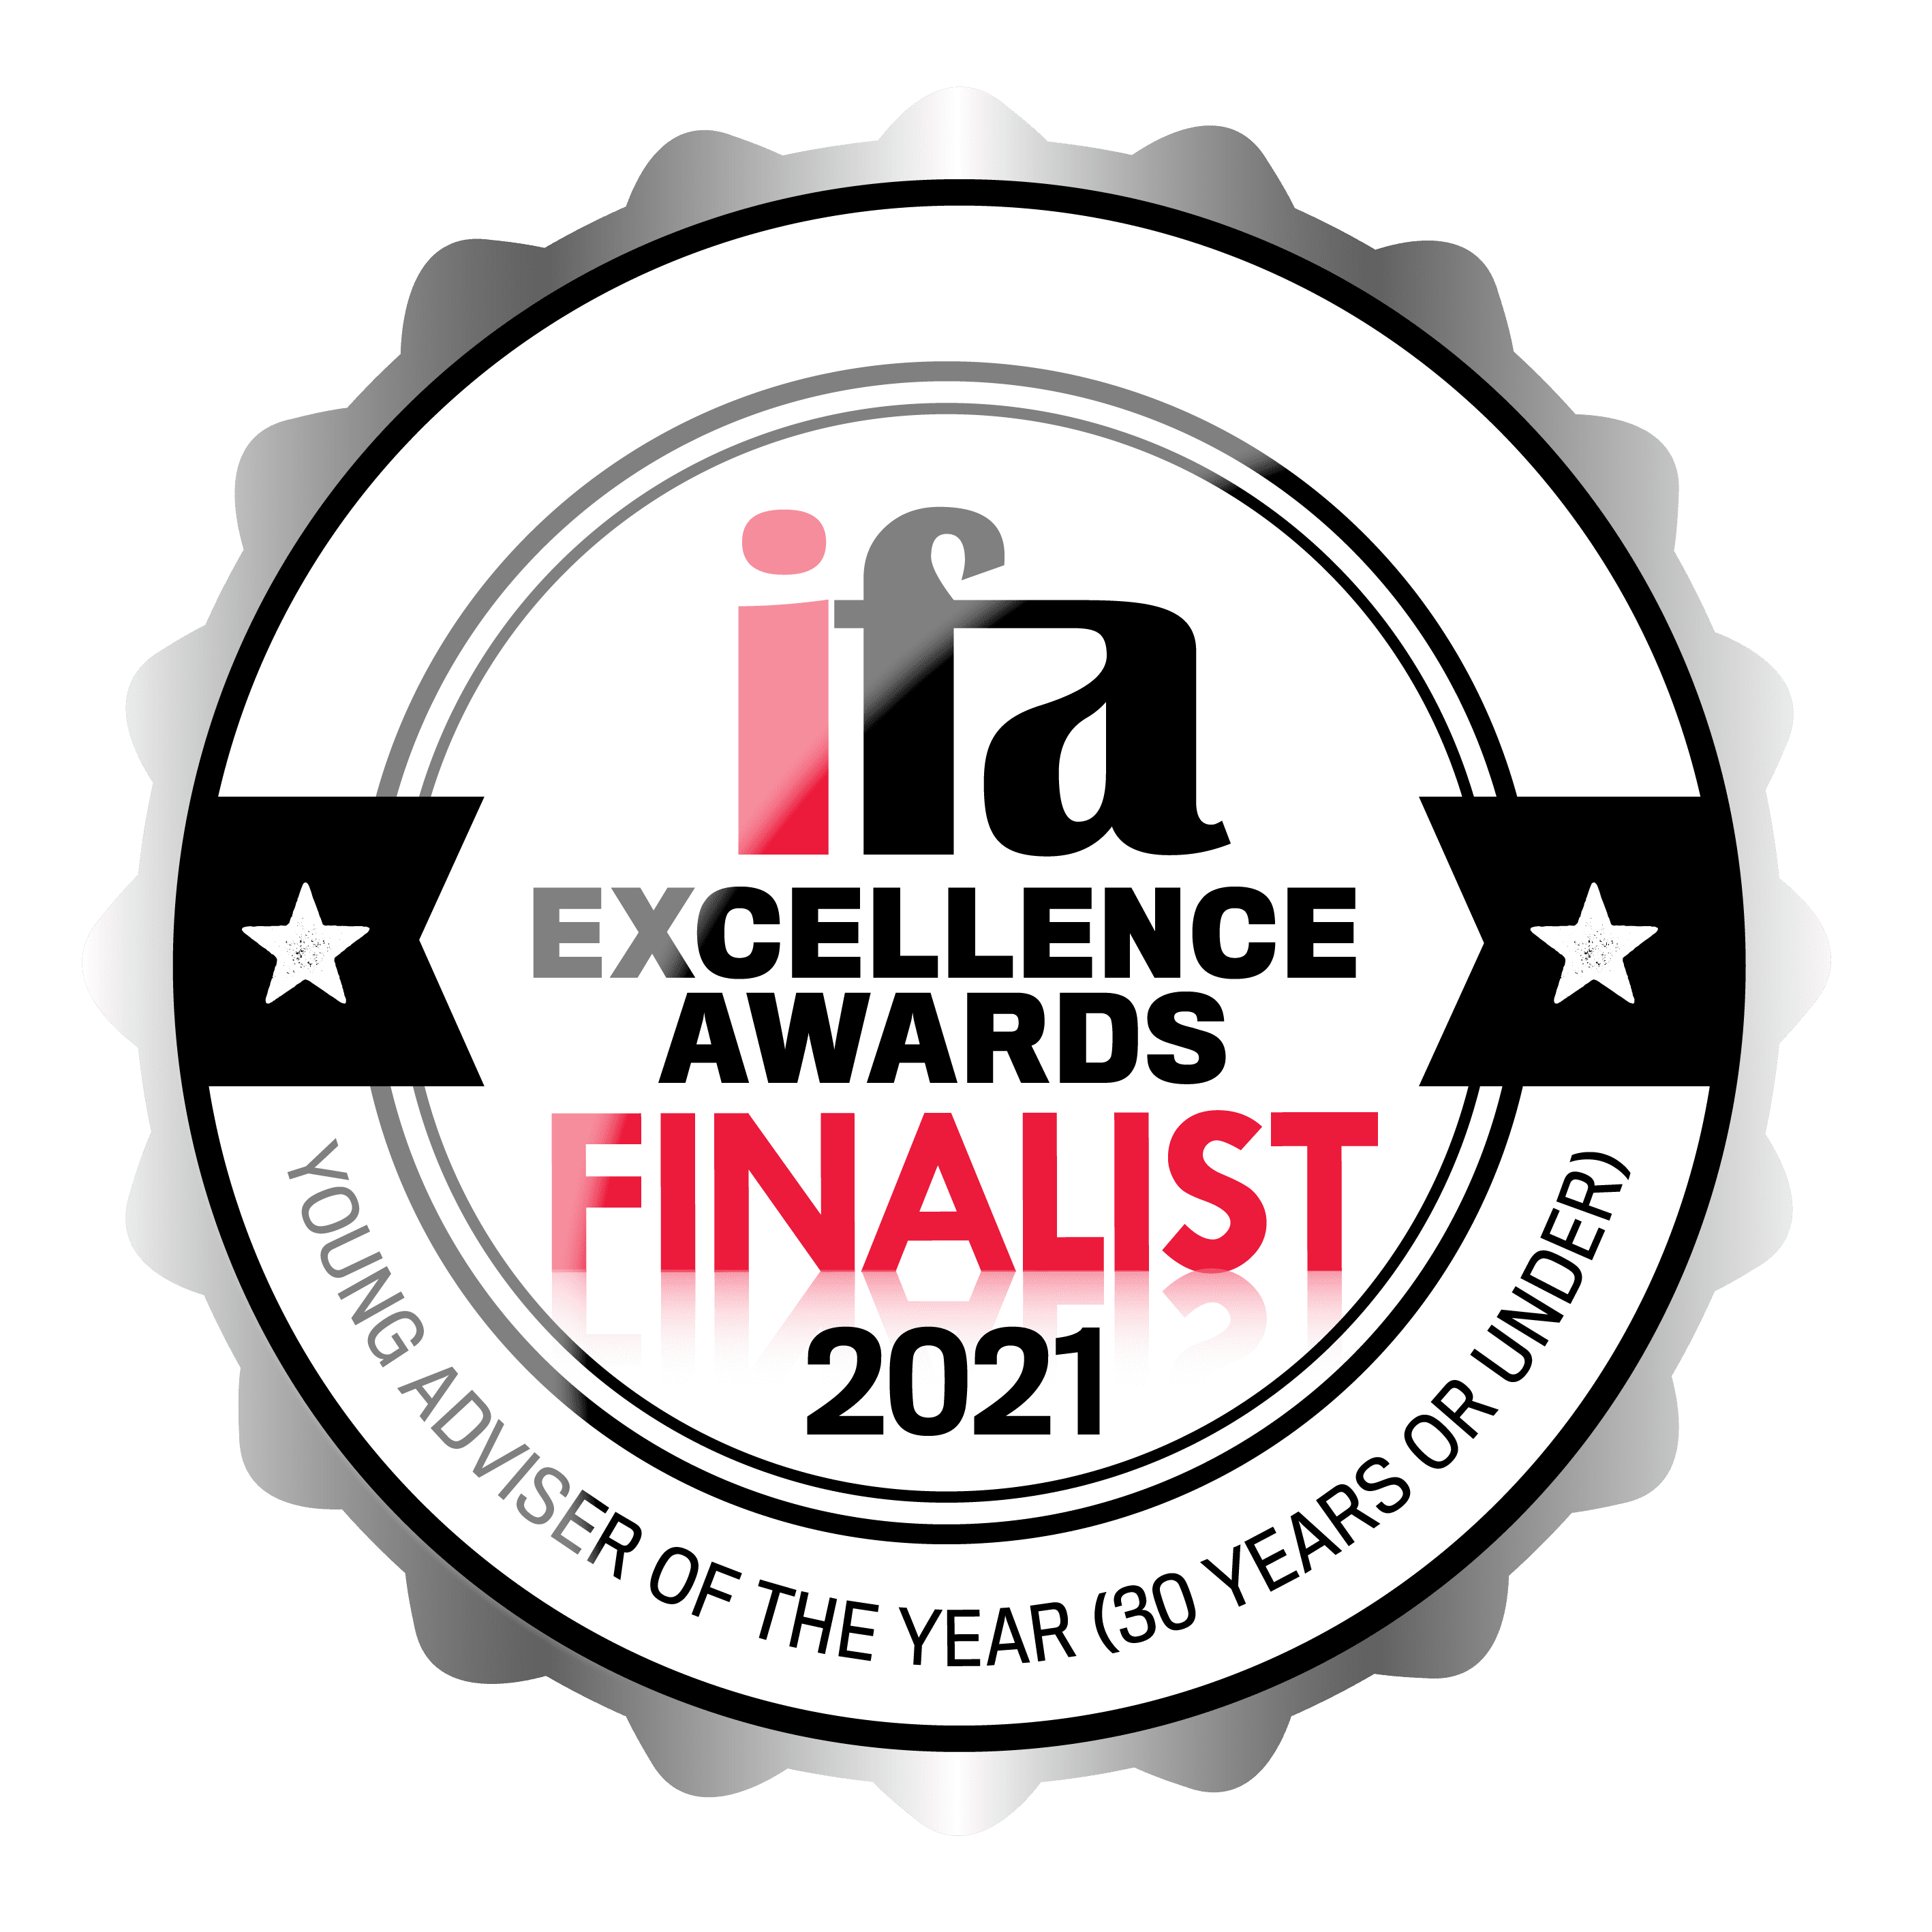 IFA Excellence Awards Finalist - Young Adviser of the Year 2021 at Alman Partners Truewealth